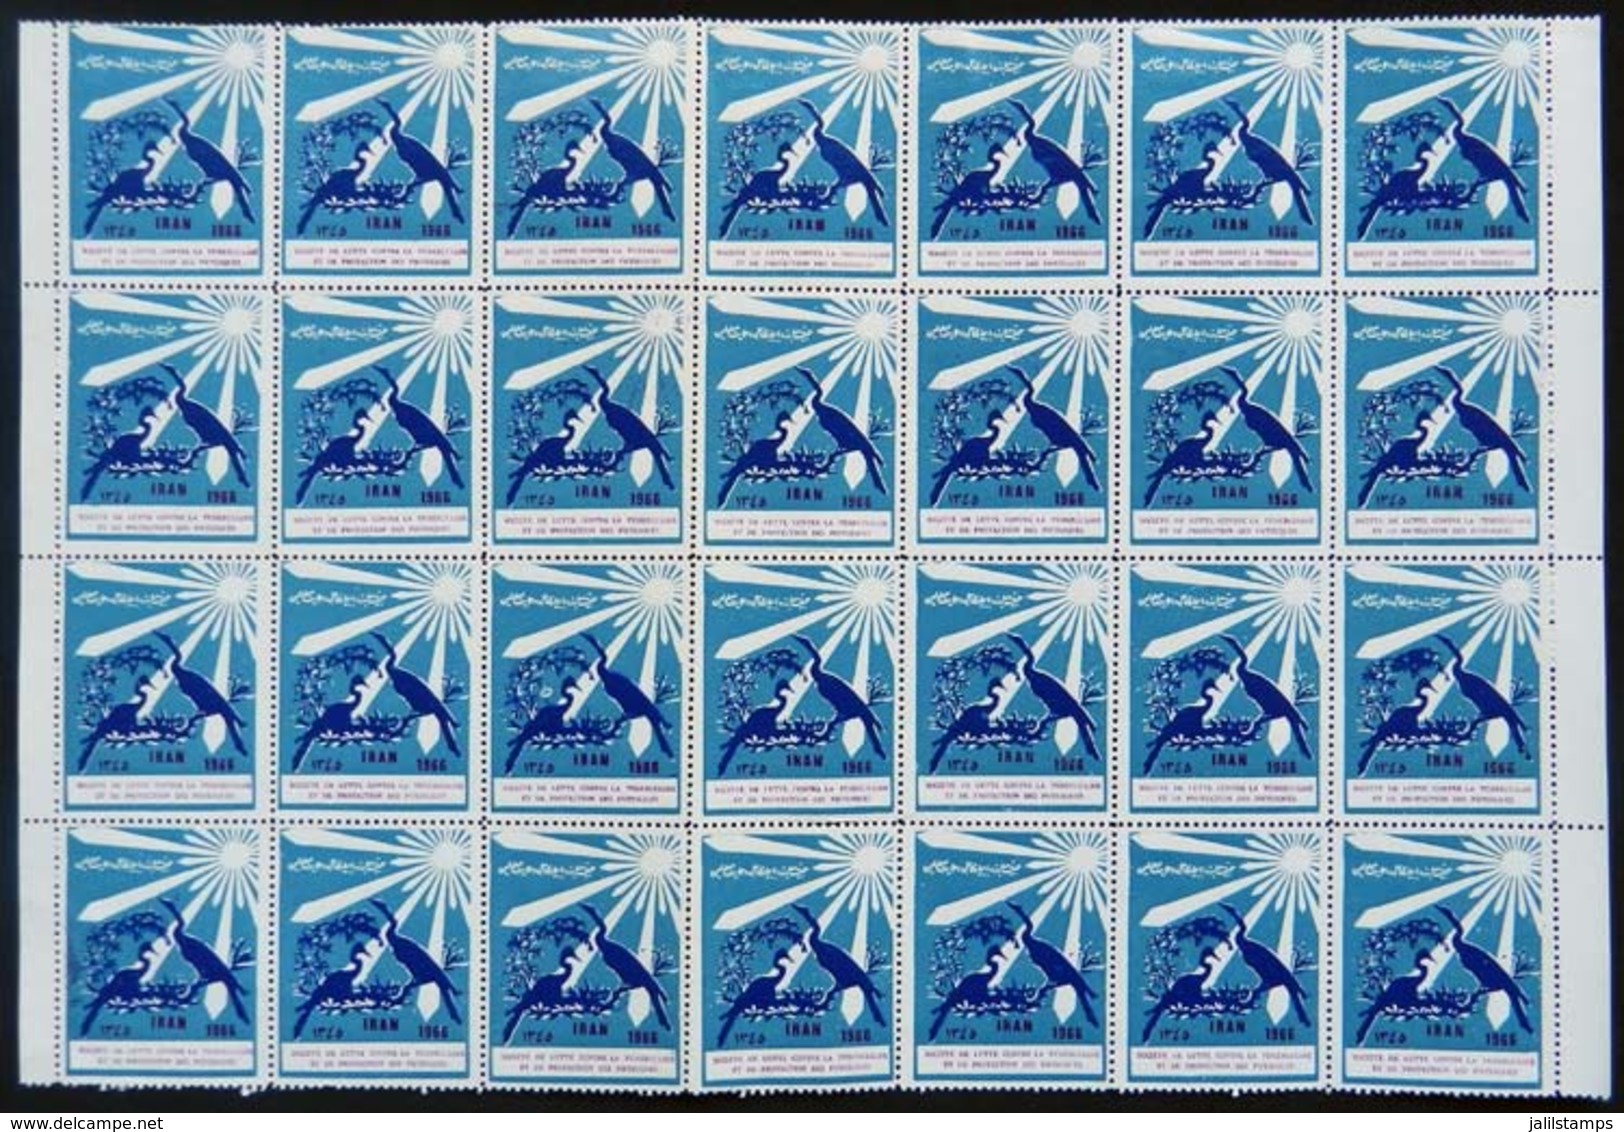 IRAN: FIGHT AGAINST TUBERCULOSIS: 1966 Issue, Large Block Of 28 Cinderellas, MNH, 2 Or 3 With Defects, Excellent General - Erinofilia